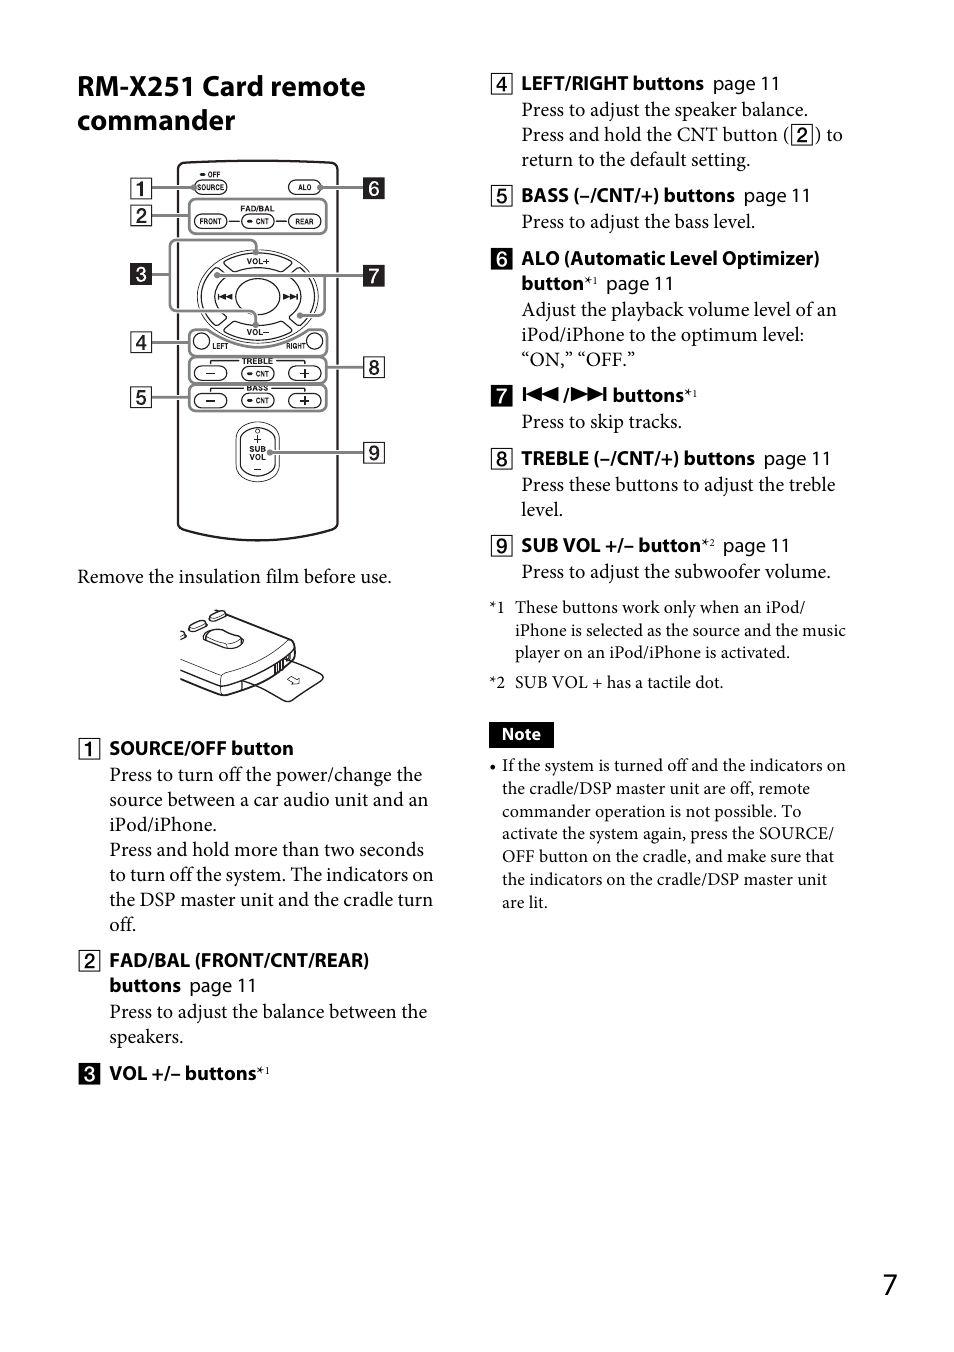 Rm-x251 card remote commander | Sony XDP-PK1000 User Manual | Page 7 / 52